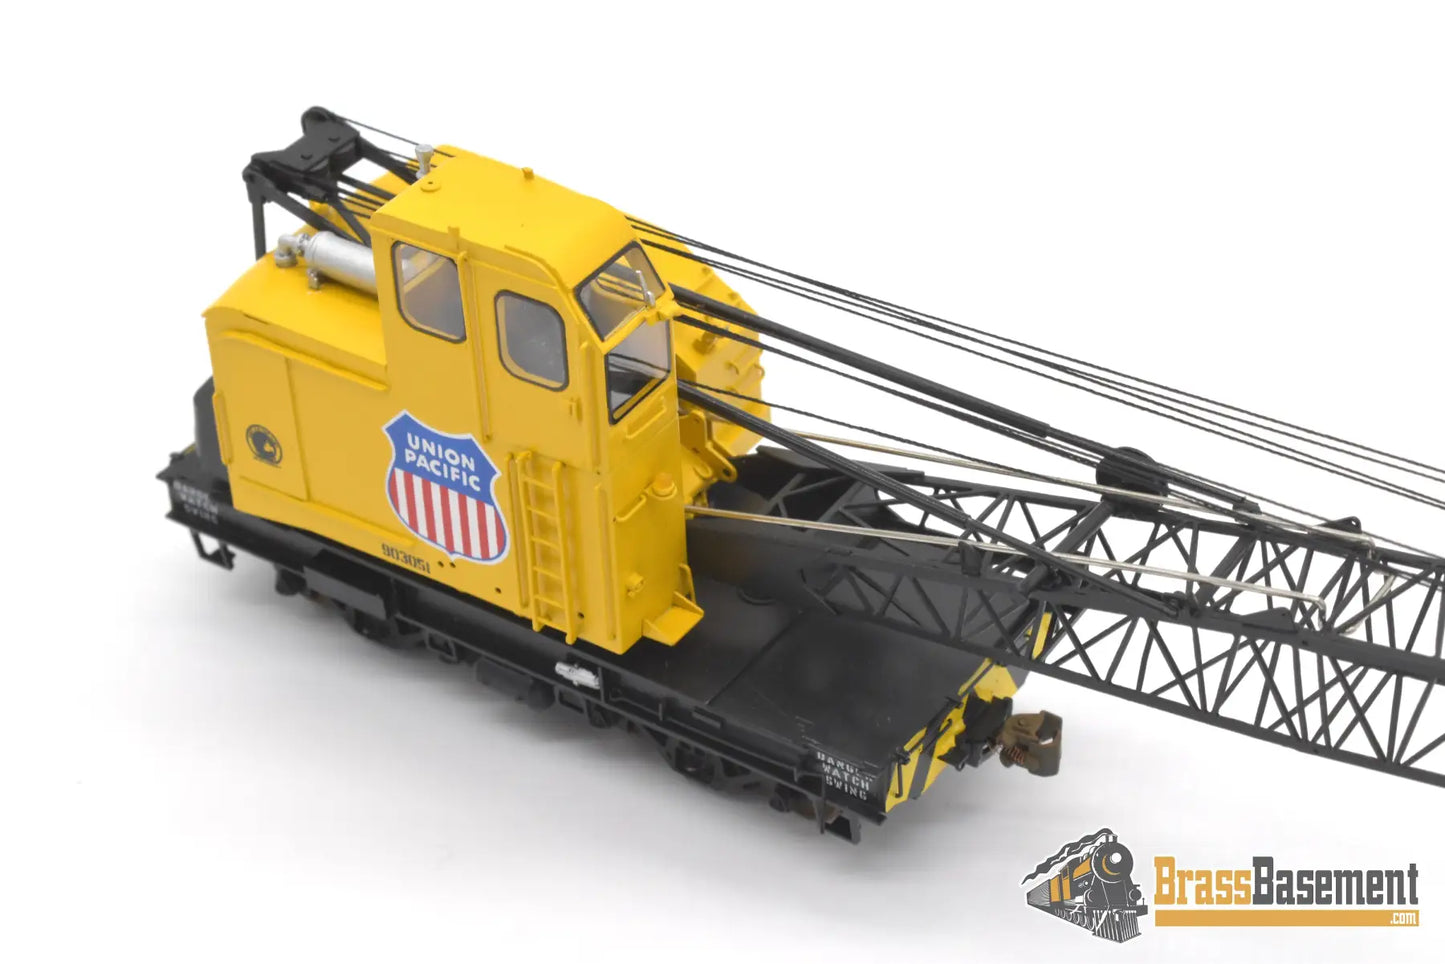 Ho Brass - Omi 3322.1 Union Pacific Up American Crane 5030 - De #903051 Armor Yellow Mint Freight